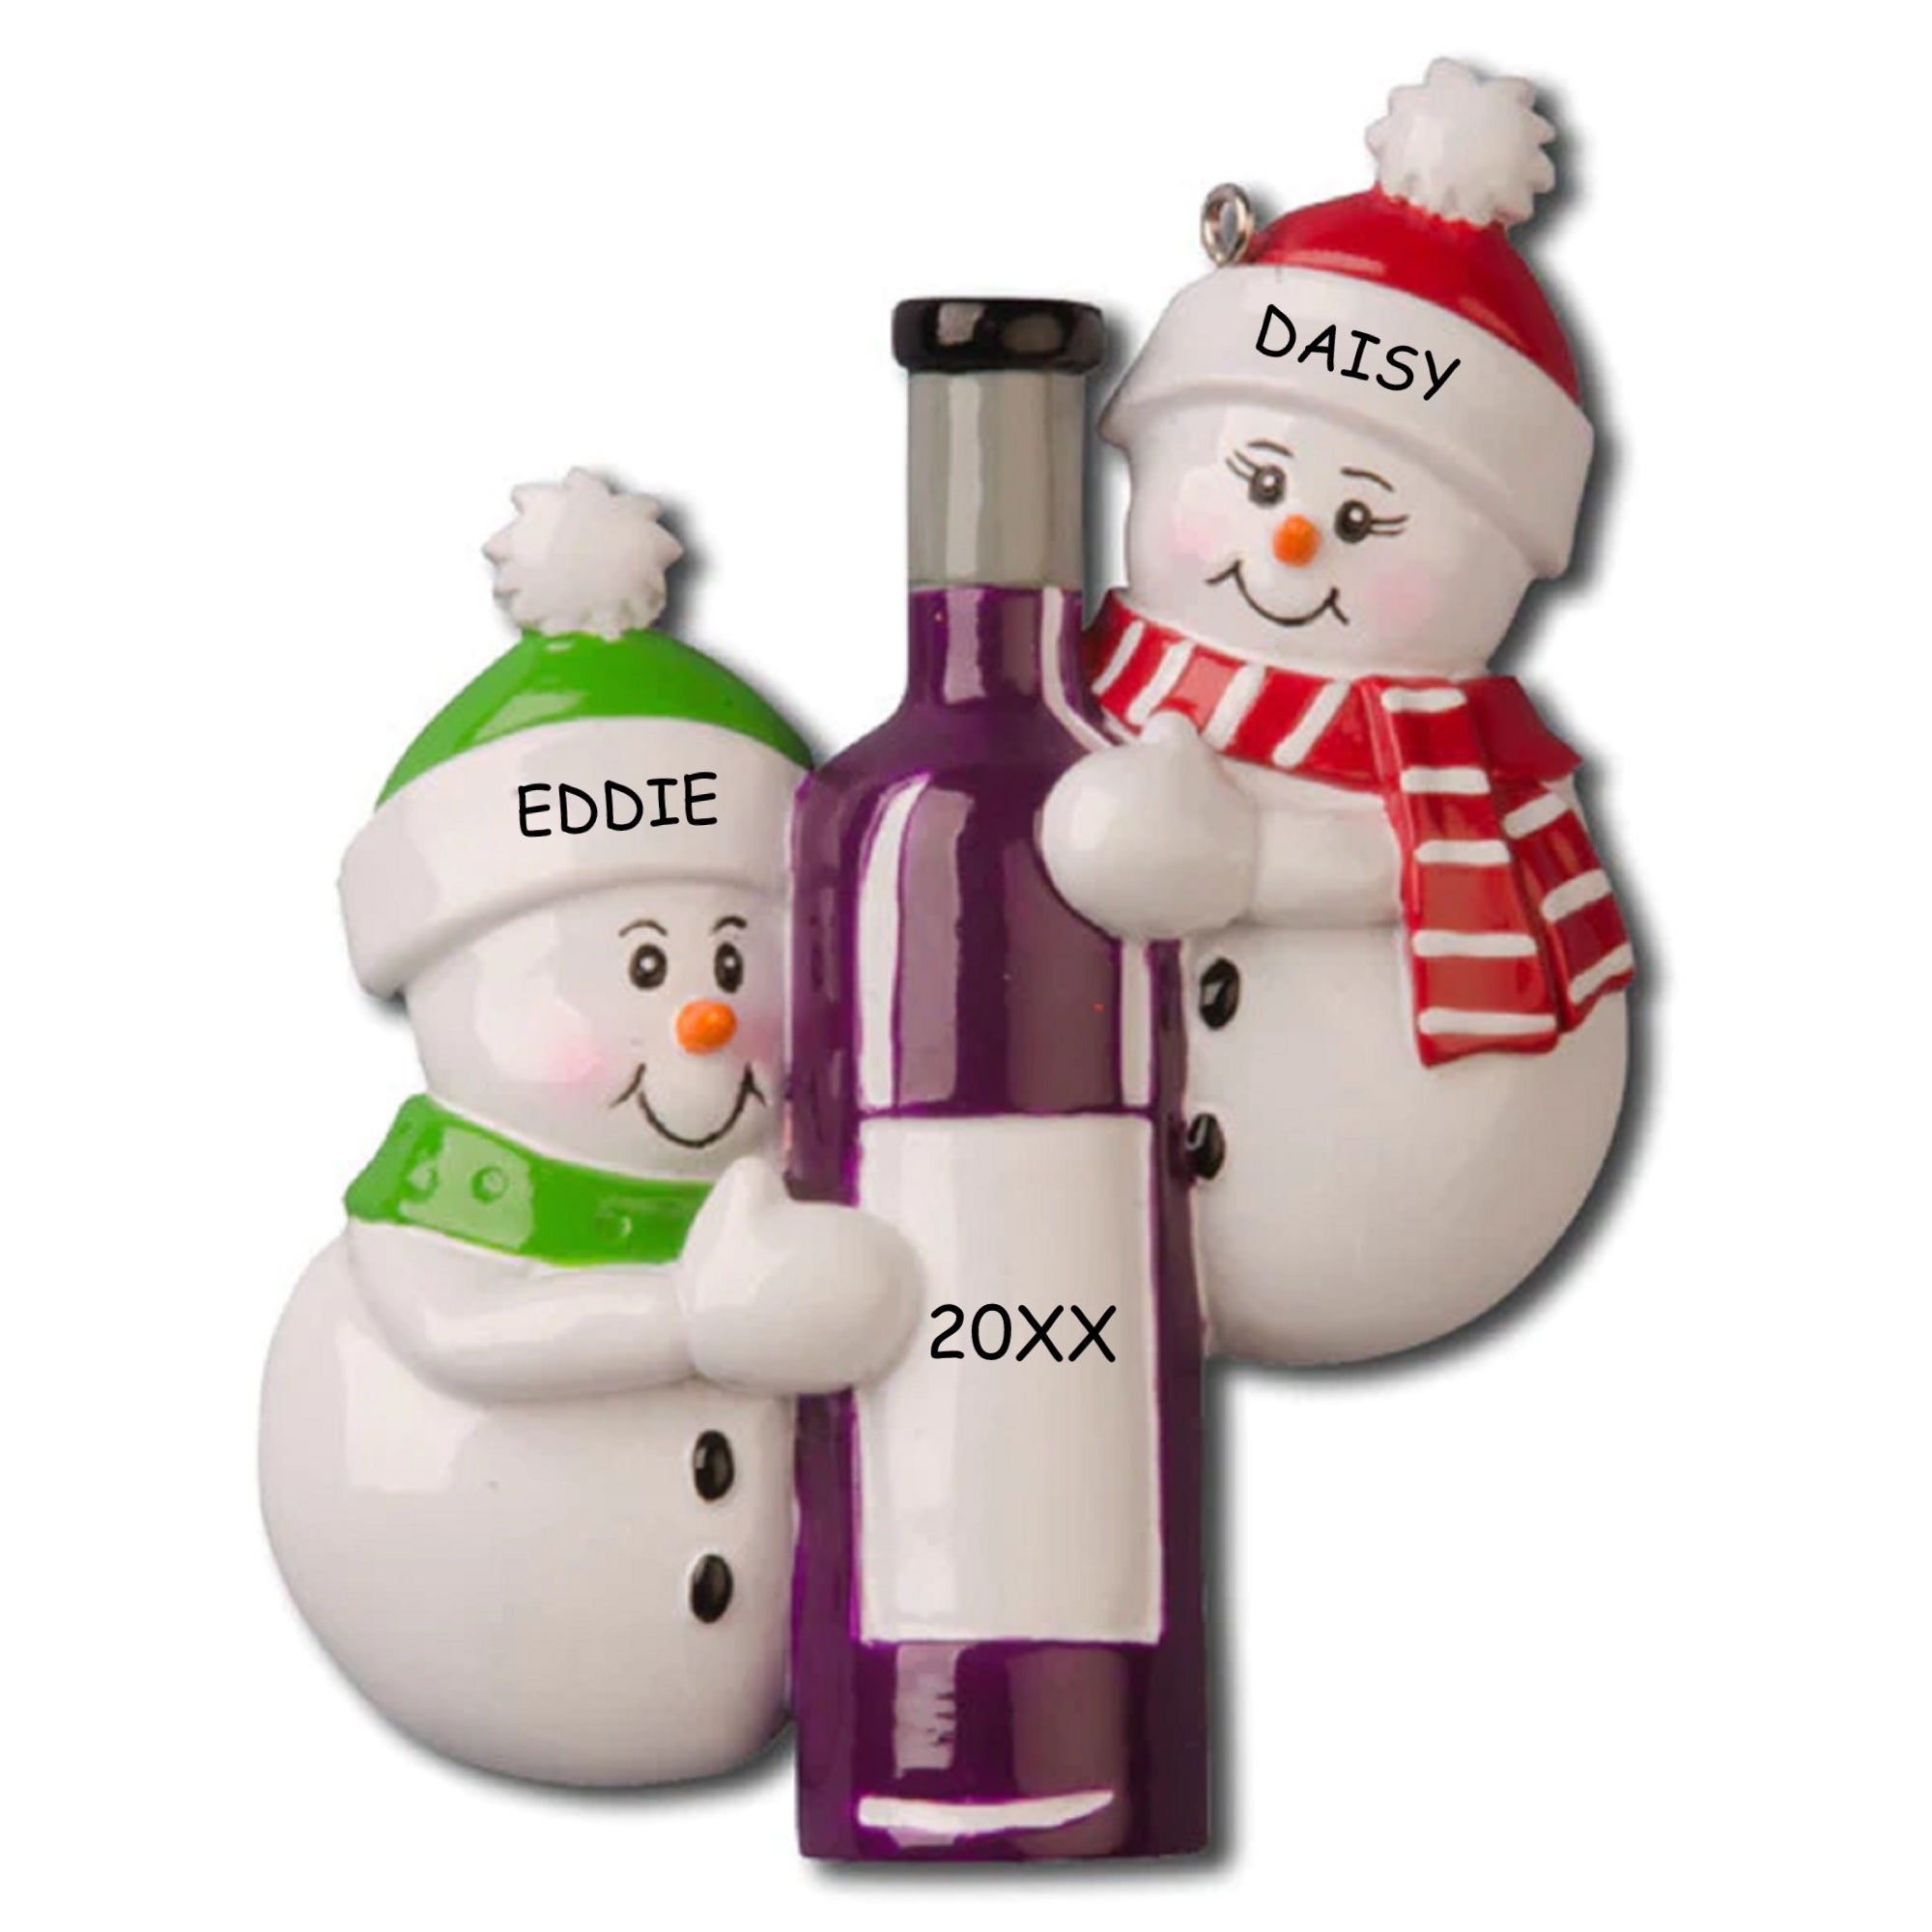 Personalized Wine Bottle Couples Christmas Ornament